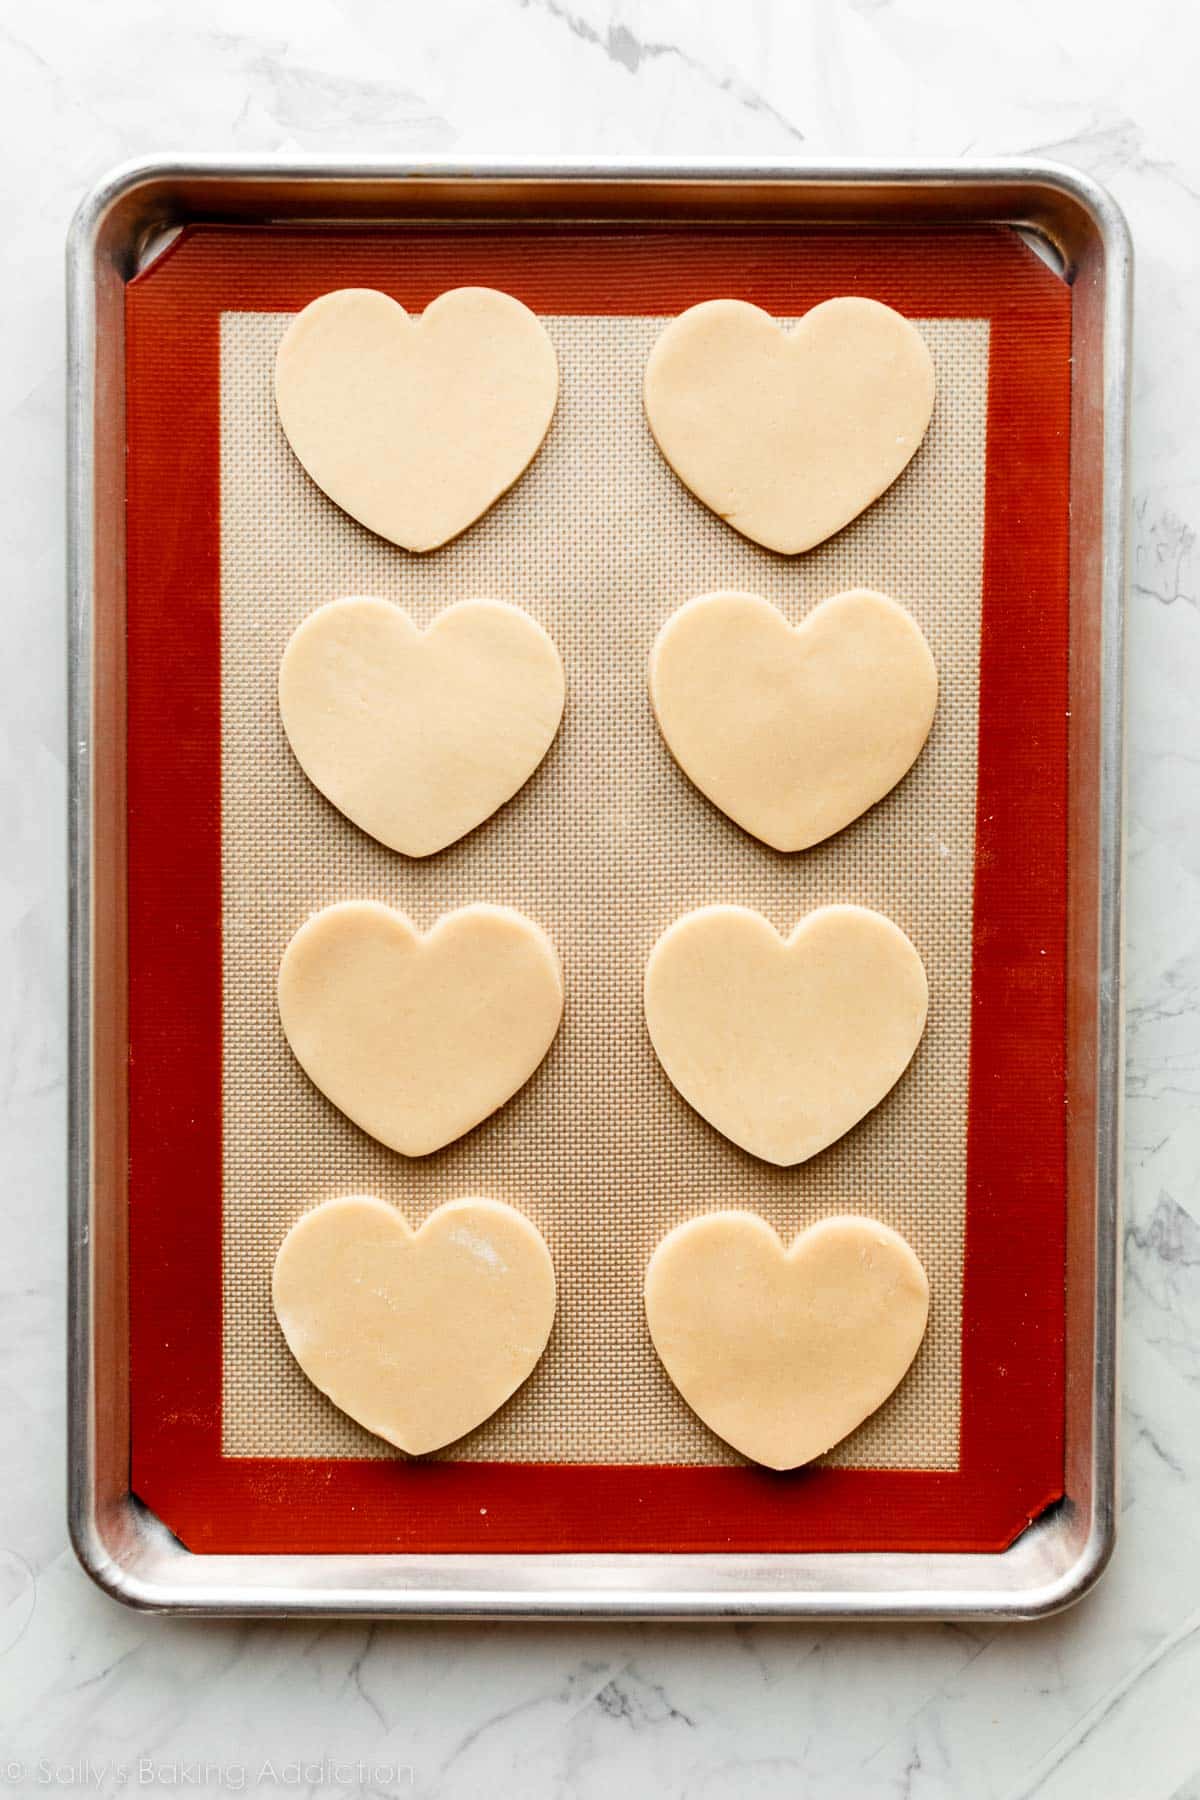 lined baking sheet with 8 heart-shaped sugar cookies on top before baking.